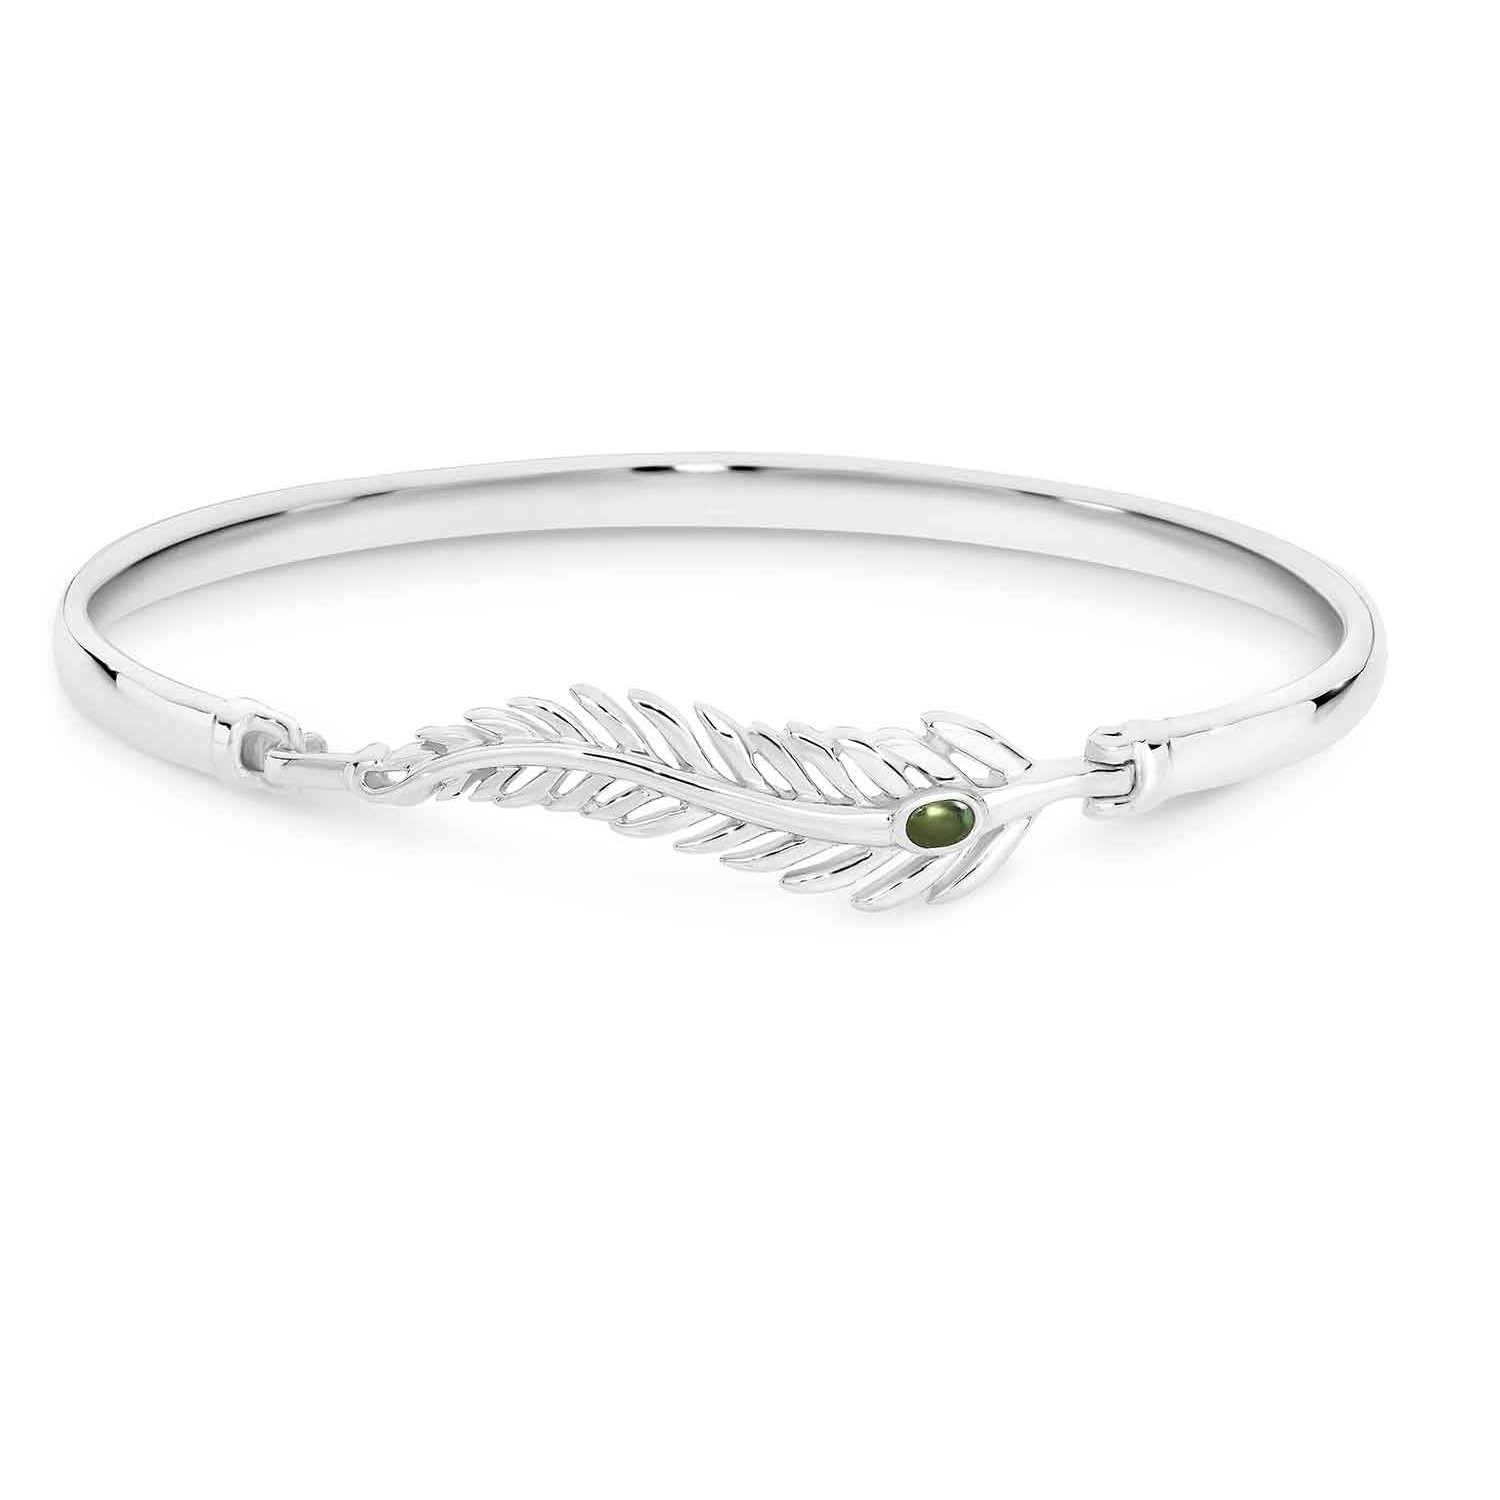 Pounamu and Silver Fern Bangle. NZ Pounamu or Greenstone bangle featuring the silver fern Set with NZ Greenstone Crafted in Sterling Silver  Gift Boxed 5 Year Written Guarantee Oxipay is simply the easier way to pay - use Oxipay and well spr @christies.on